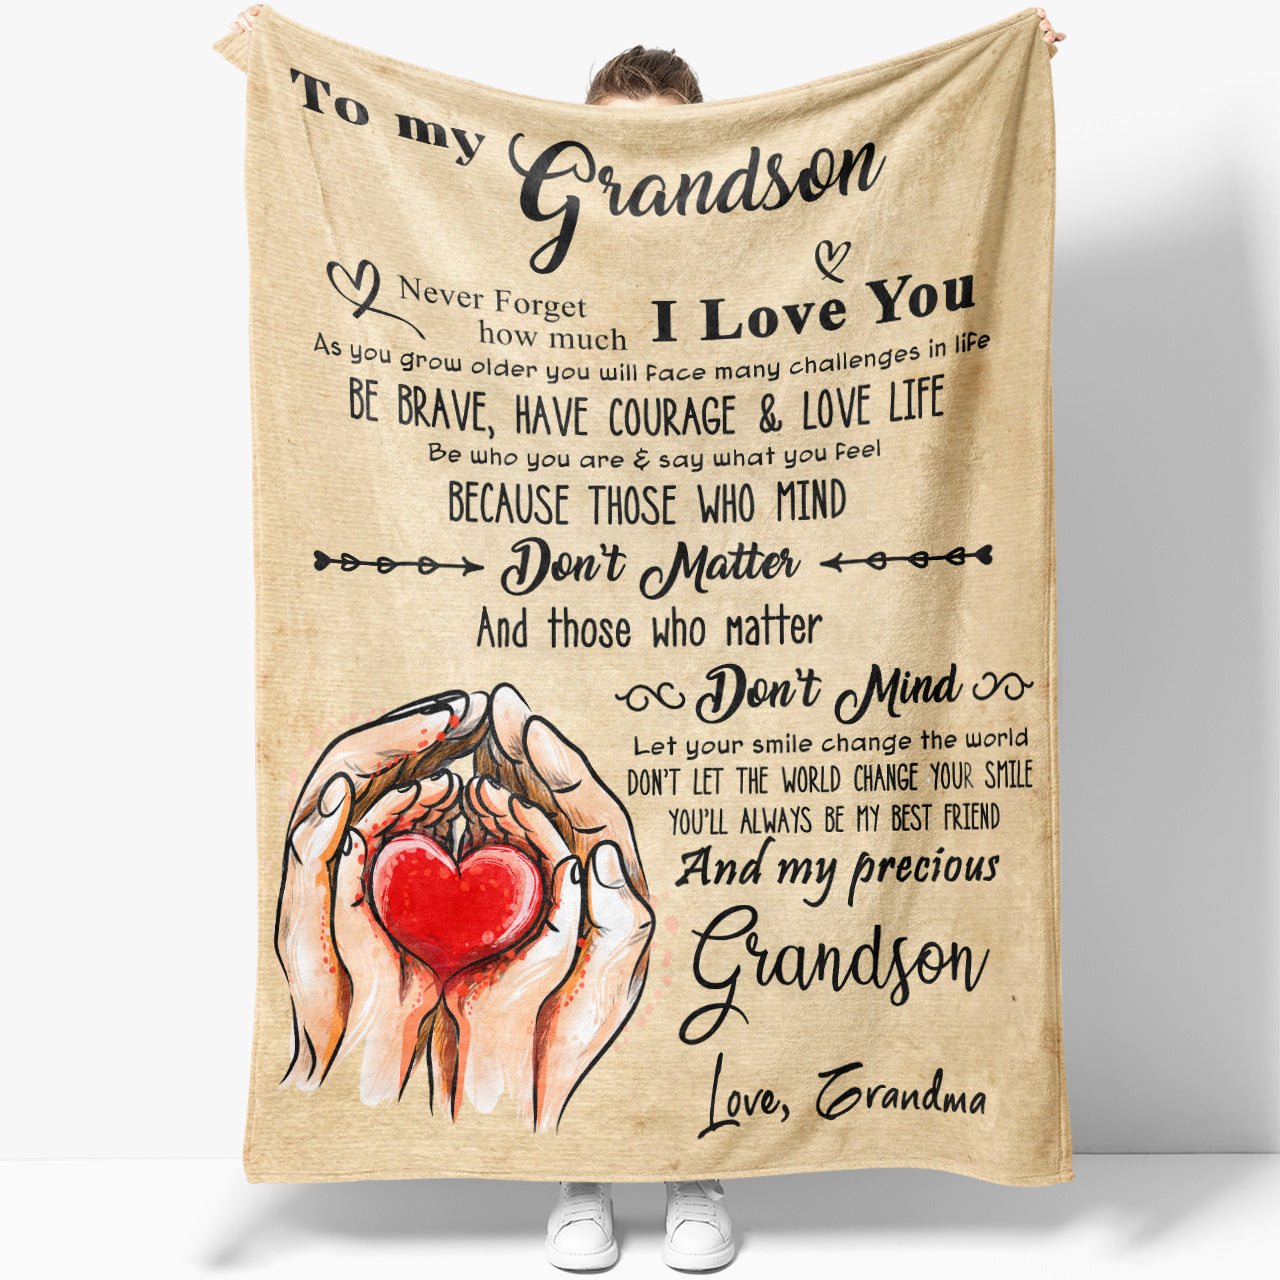 Blanket Gift Ideas To My Grandson, Be Brave Have Courage Love Life Blanket